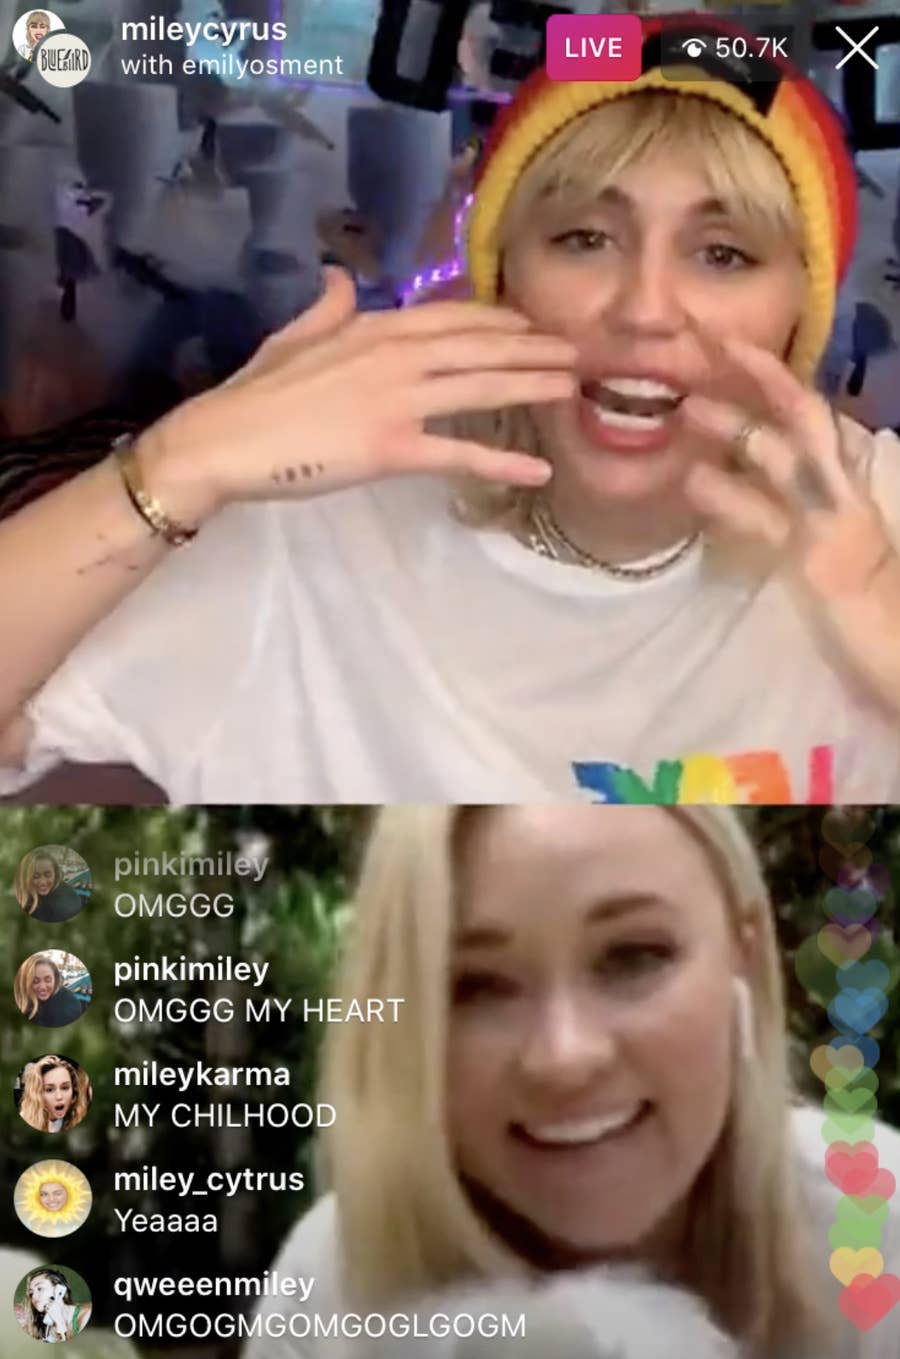 Lesbian Porn Miley Naked - Miley Cyrus And Emily Osment Reunited On Instagram Live